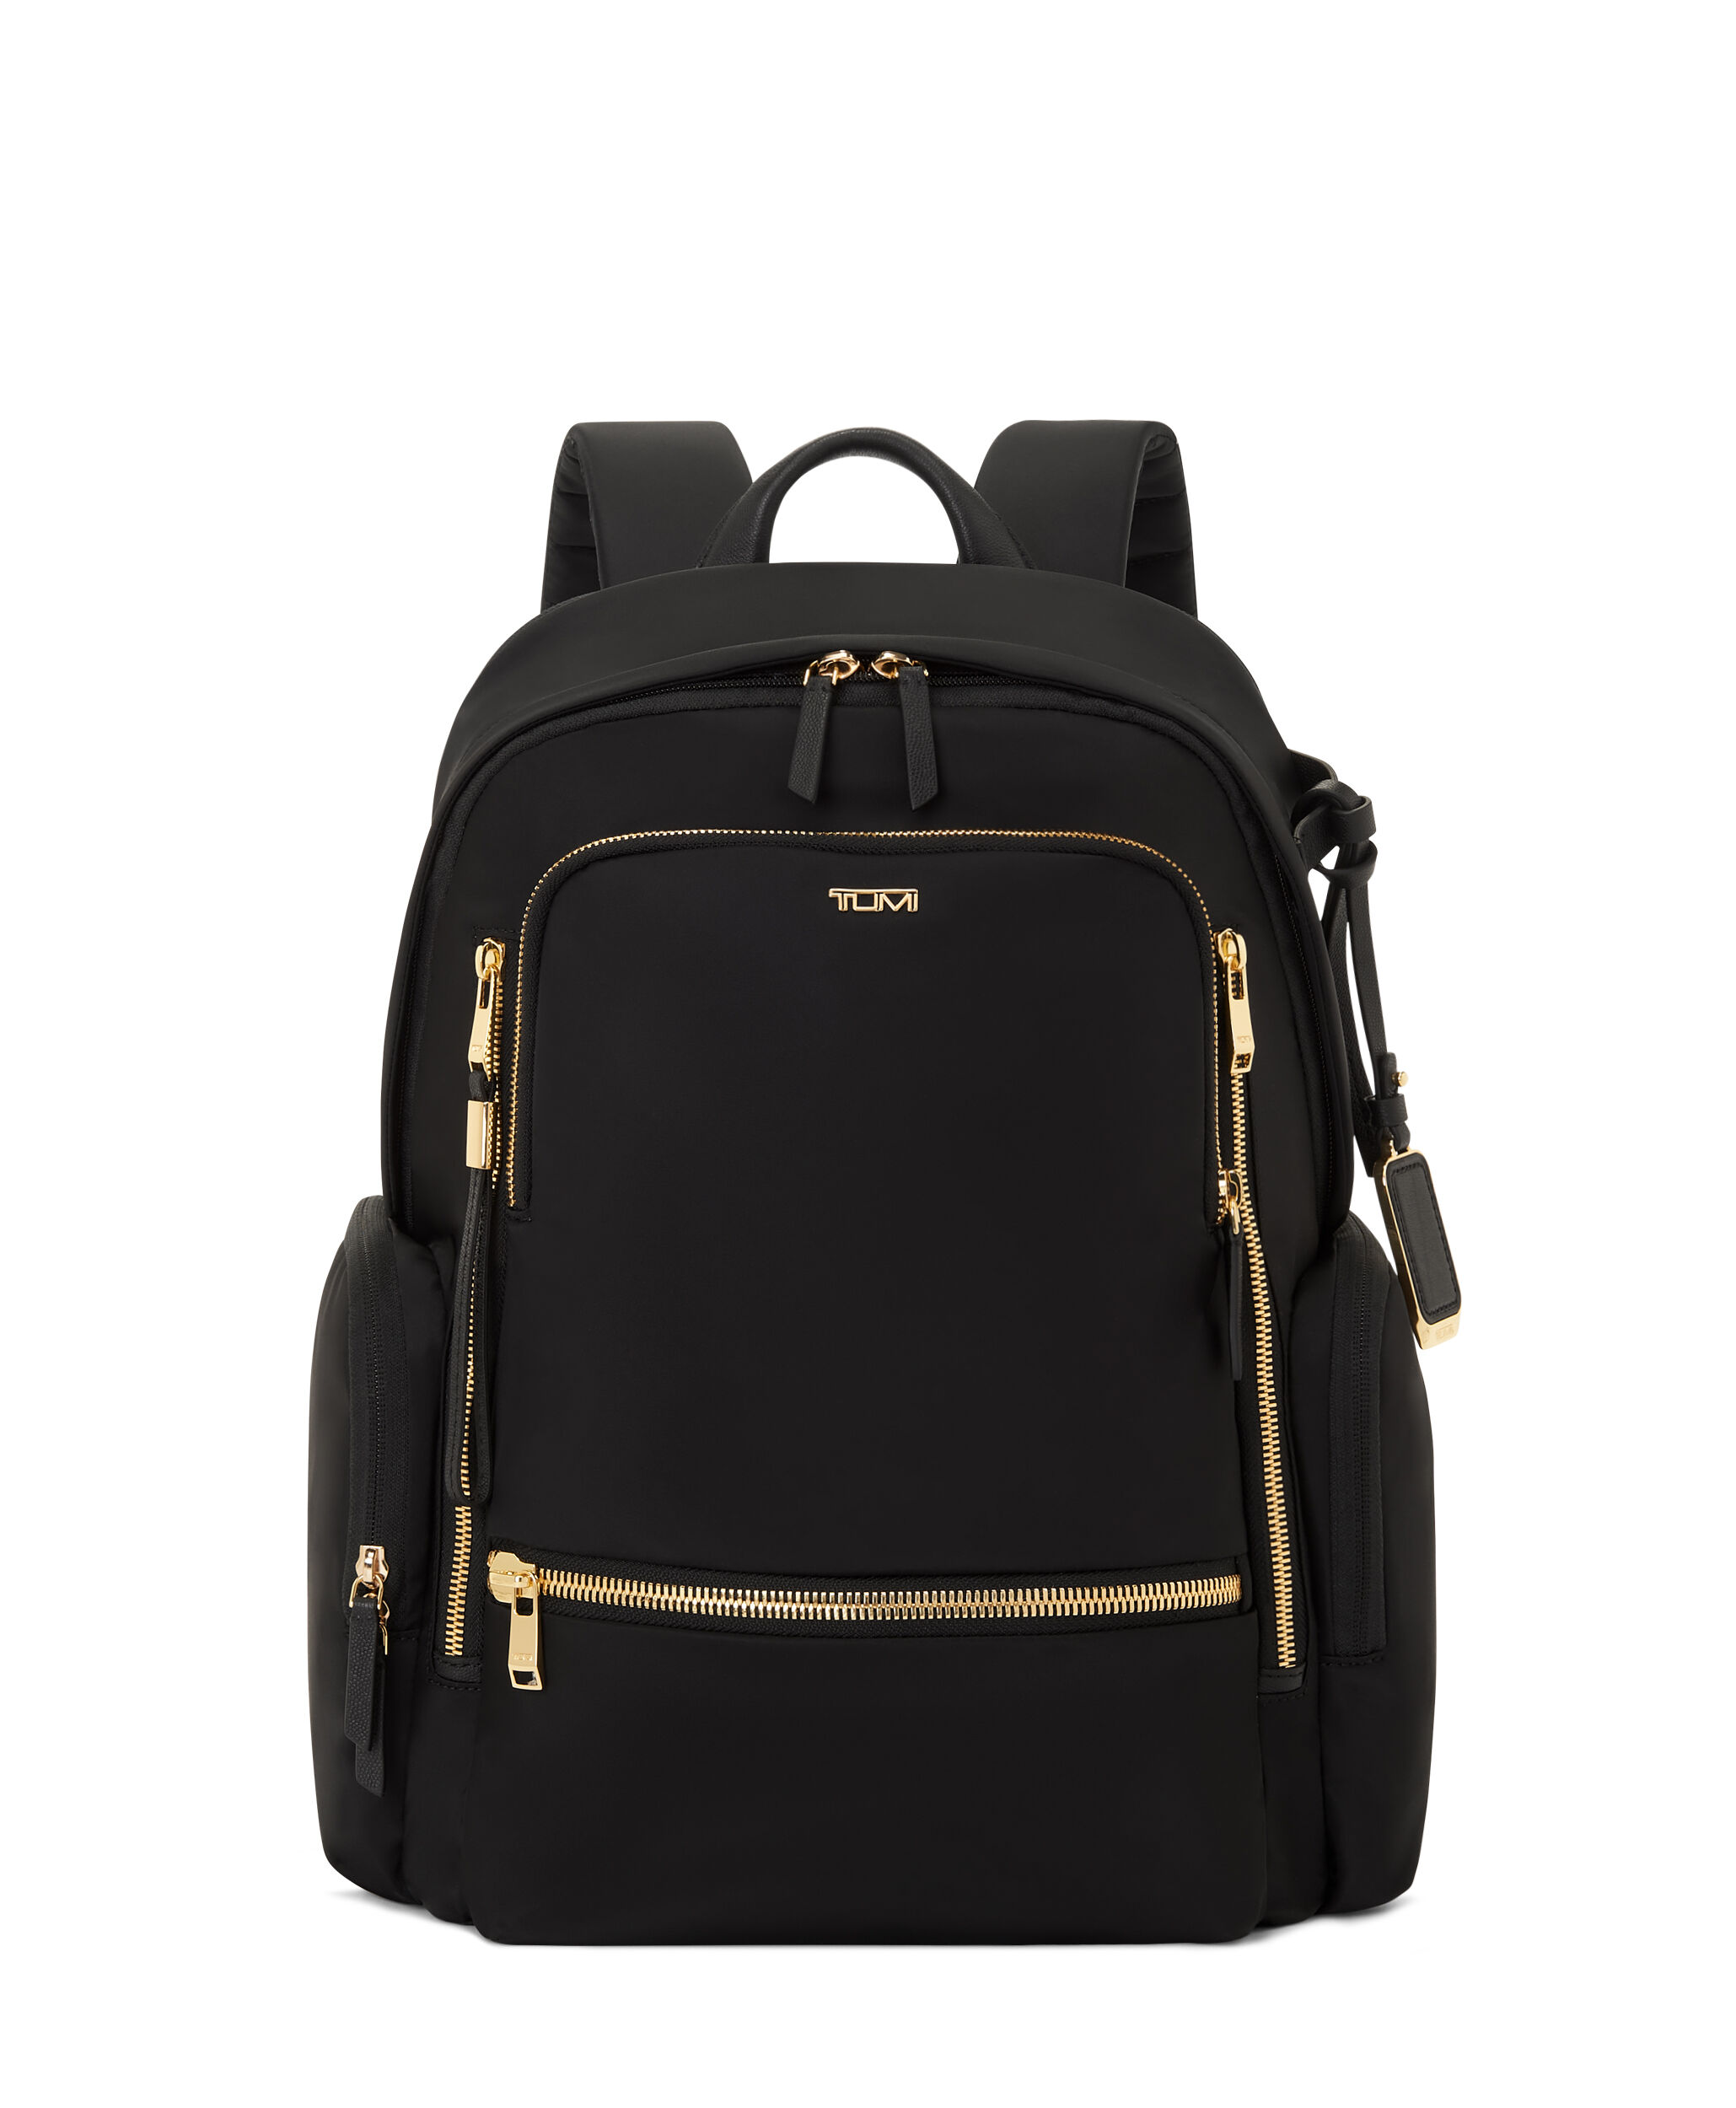 VIP 0.90 kg Black Commuter Secure 02 Laptop Compatible Backpack at Rs 2590  | Computer Backpack in Mumbai | ID: 20638343533